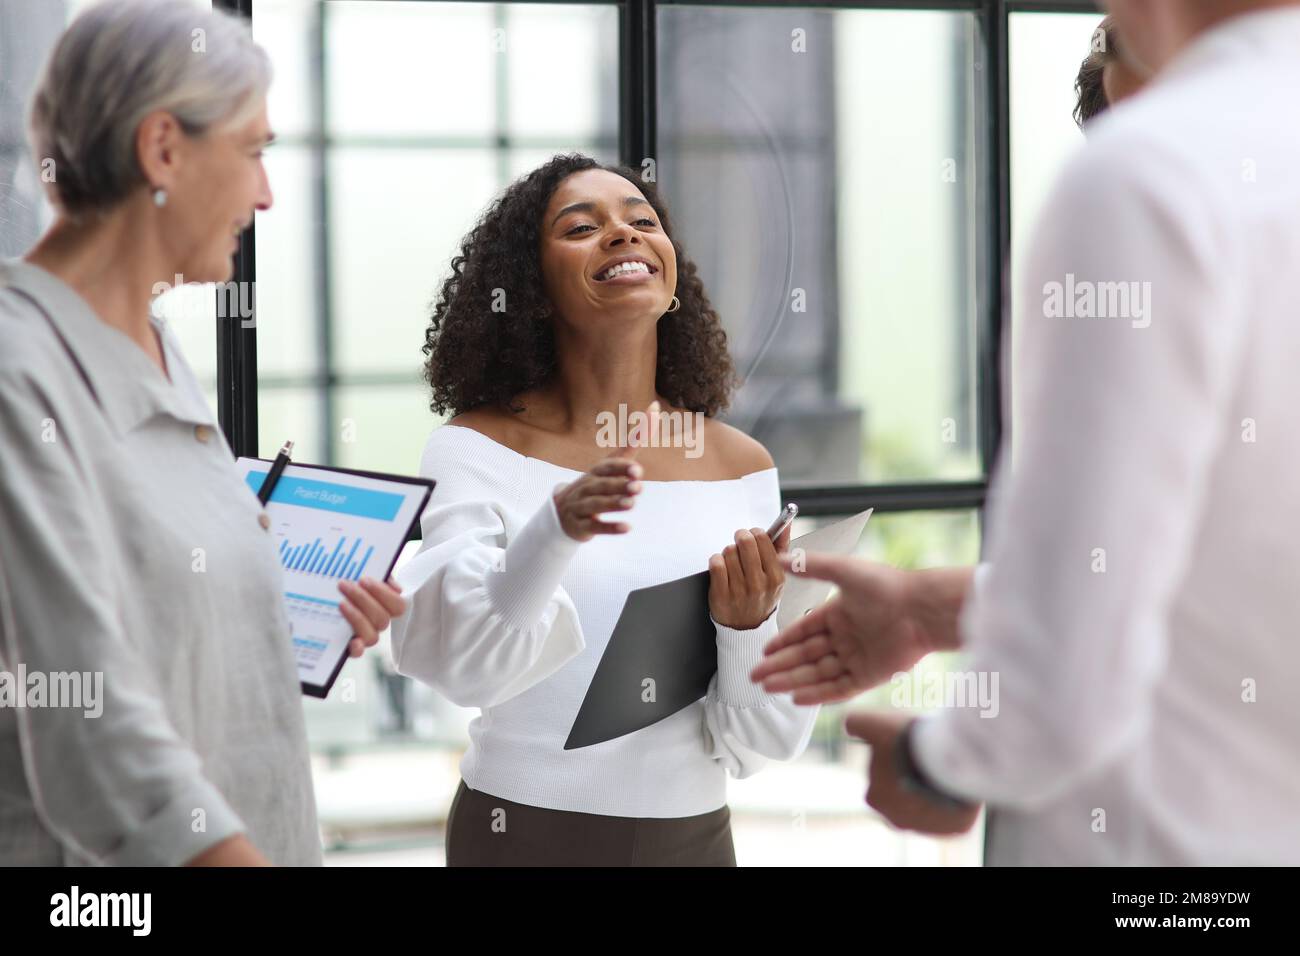 Group of business workers standing together shaking hands at the office Stock Photo